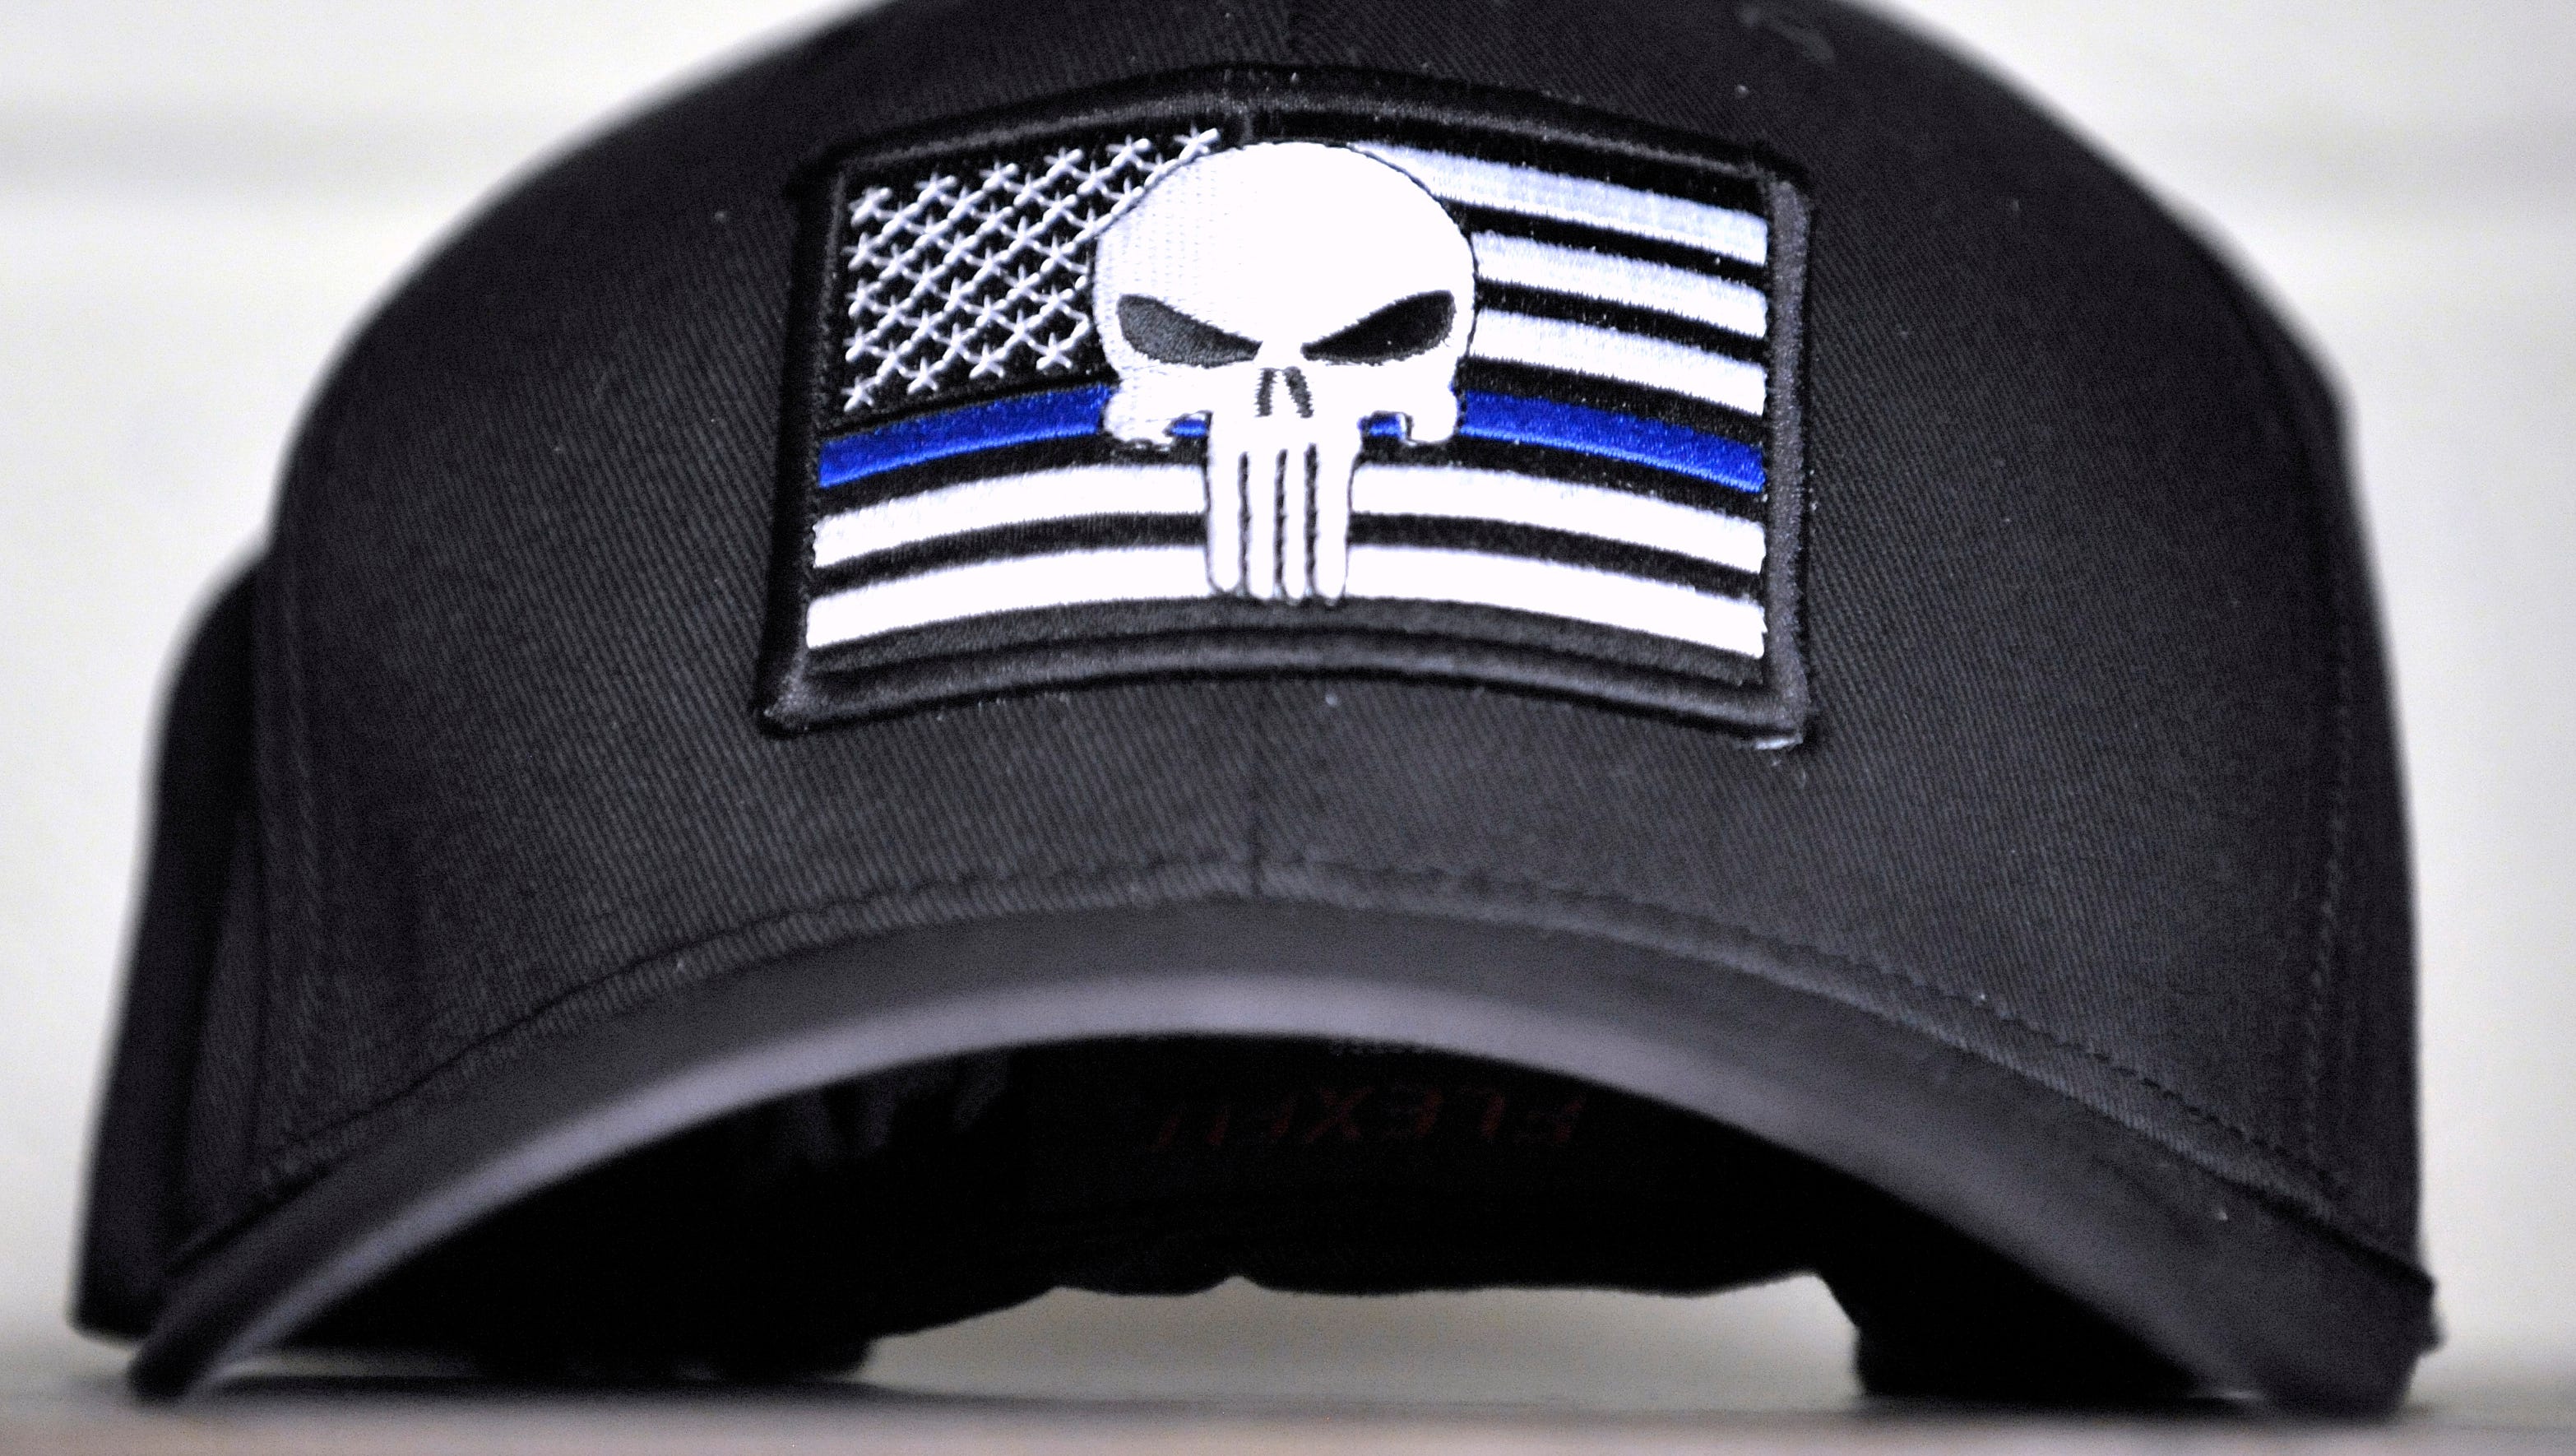 This is a TBL USA Punisher hat. TBL USA law enforcement liaison Jacob Bouchard says while talking about the hat, "at the end of the day, whether on this earth or somewhere else, the criminal always gets punished."